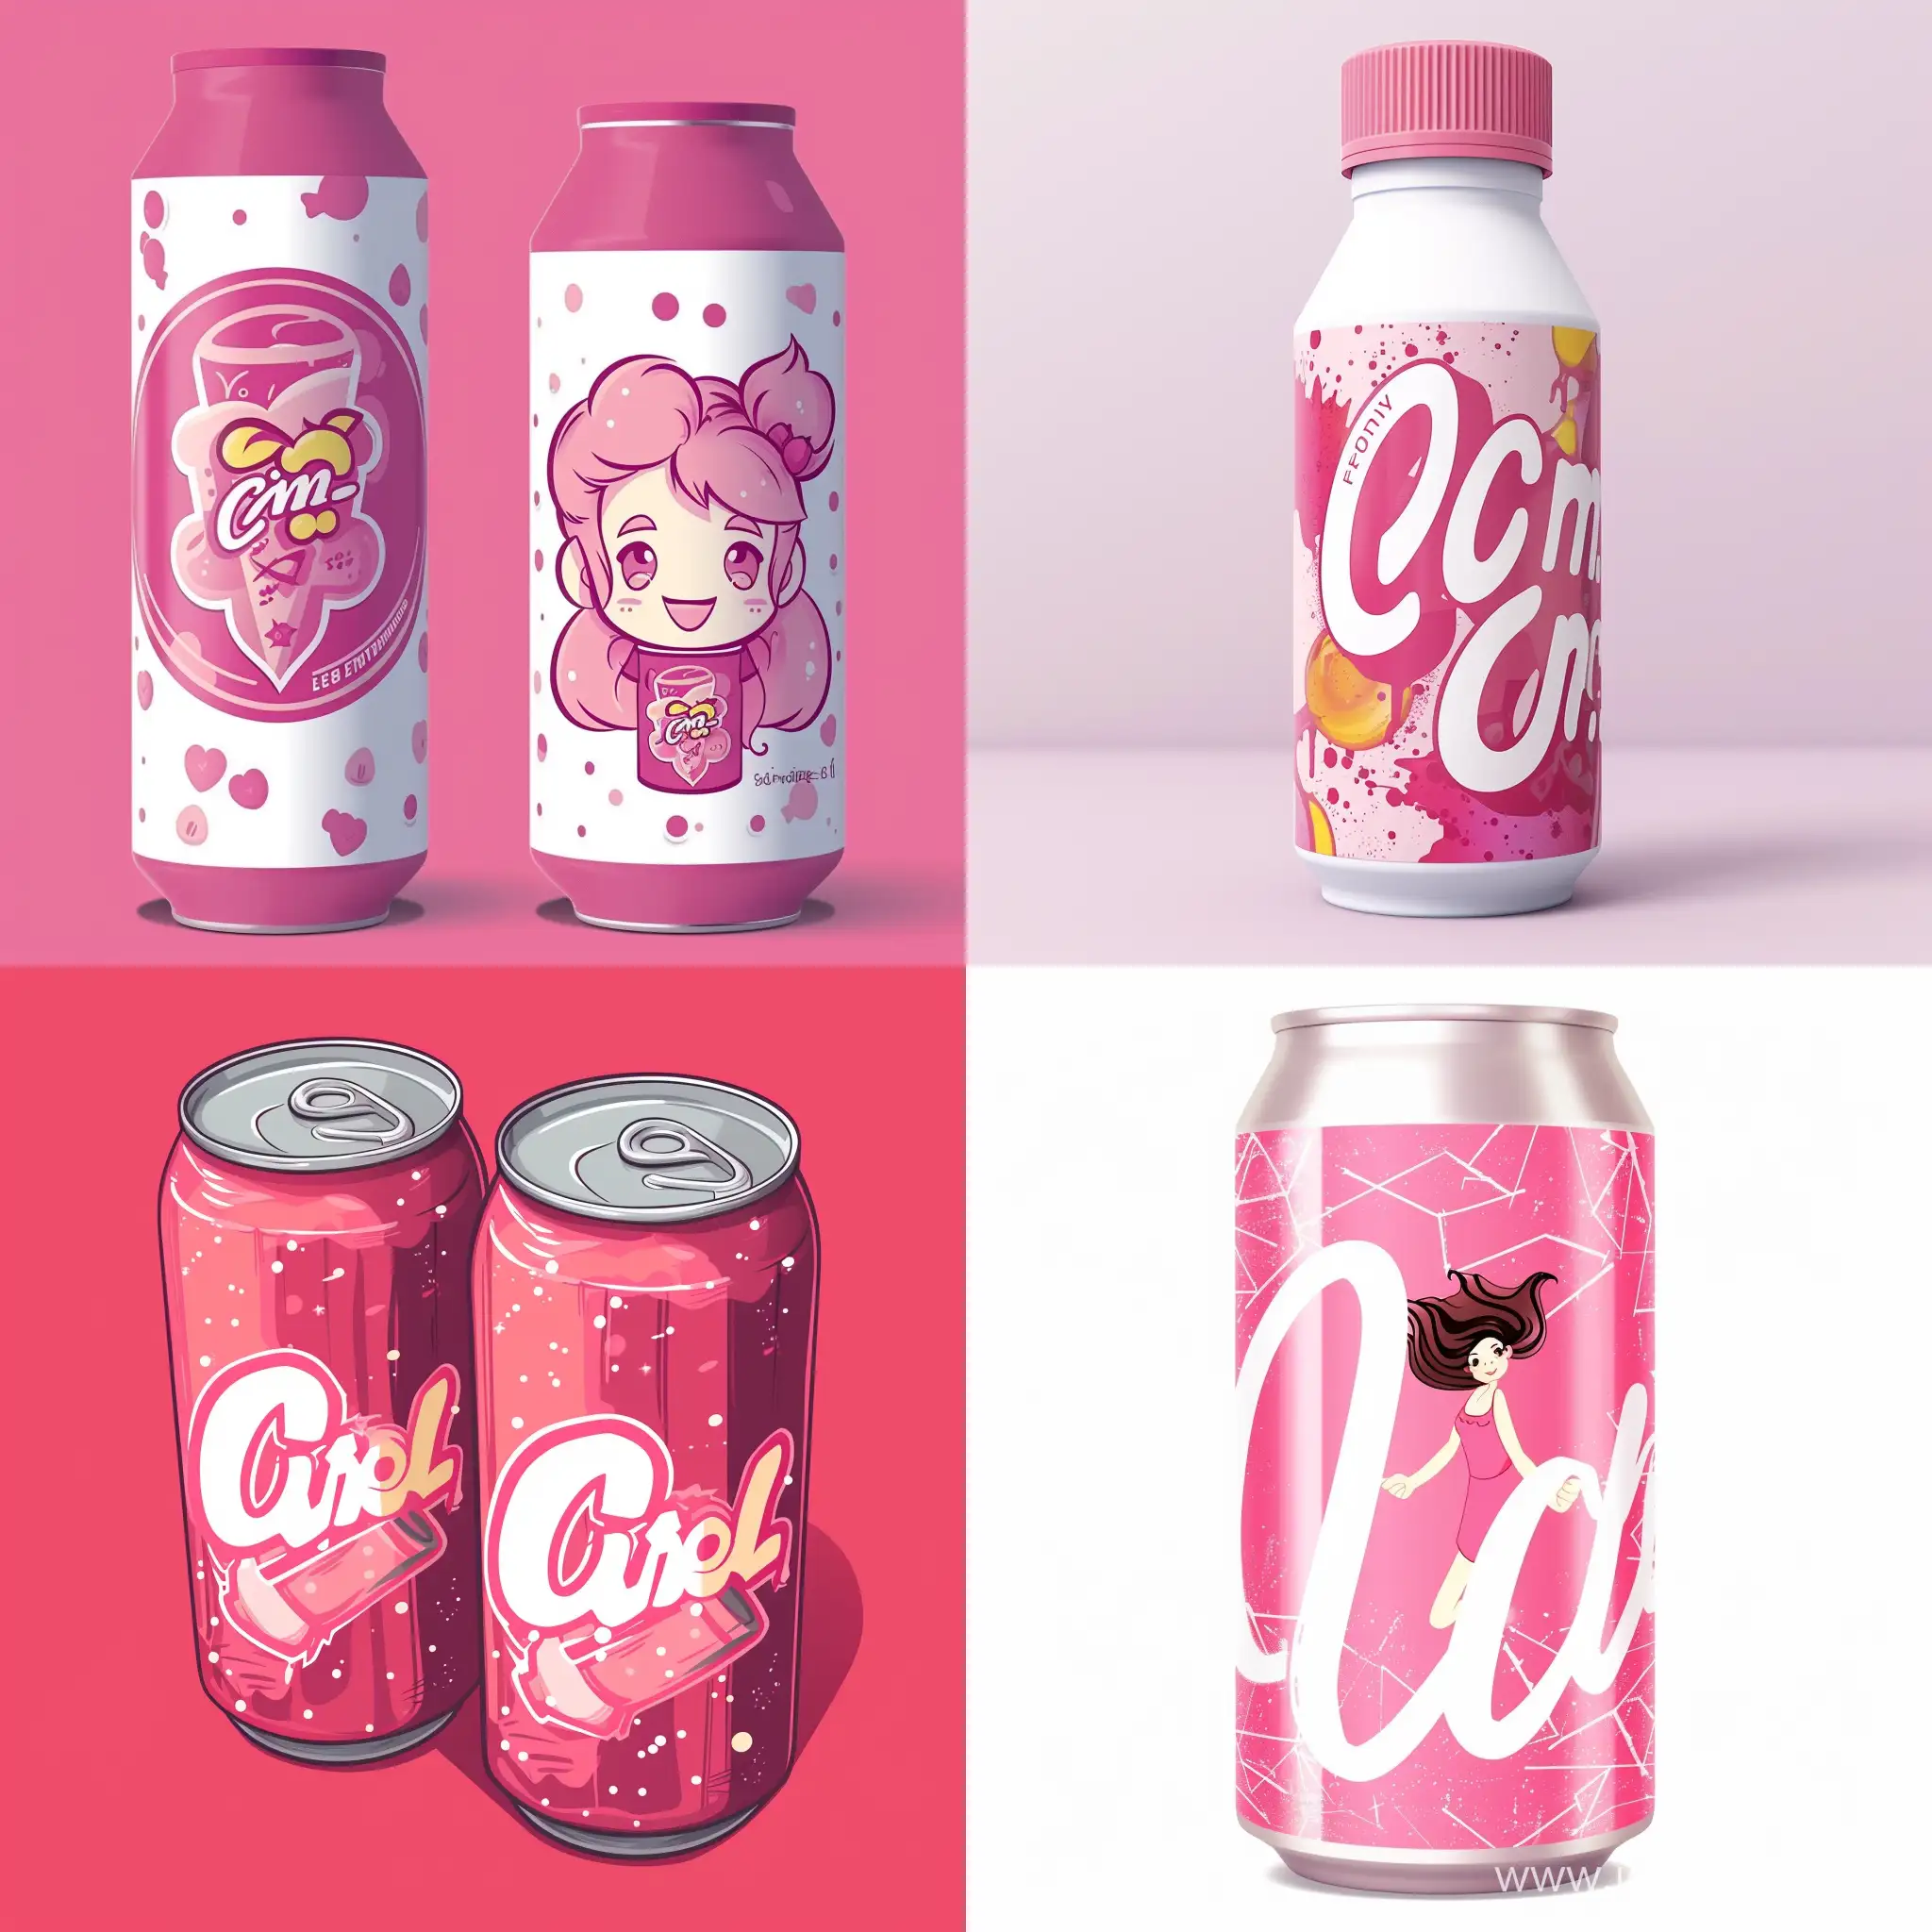 Energize-in-Style-with-Pink-Bliss-Girly-Energy-Drink-with-Cute-Logo